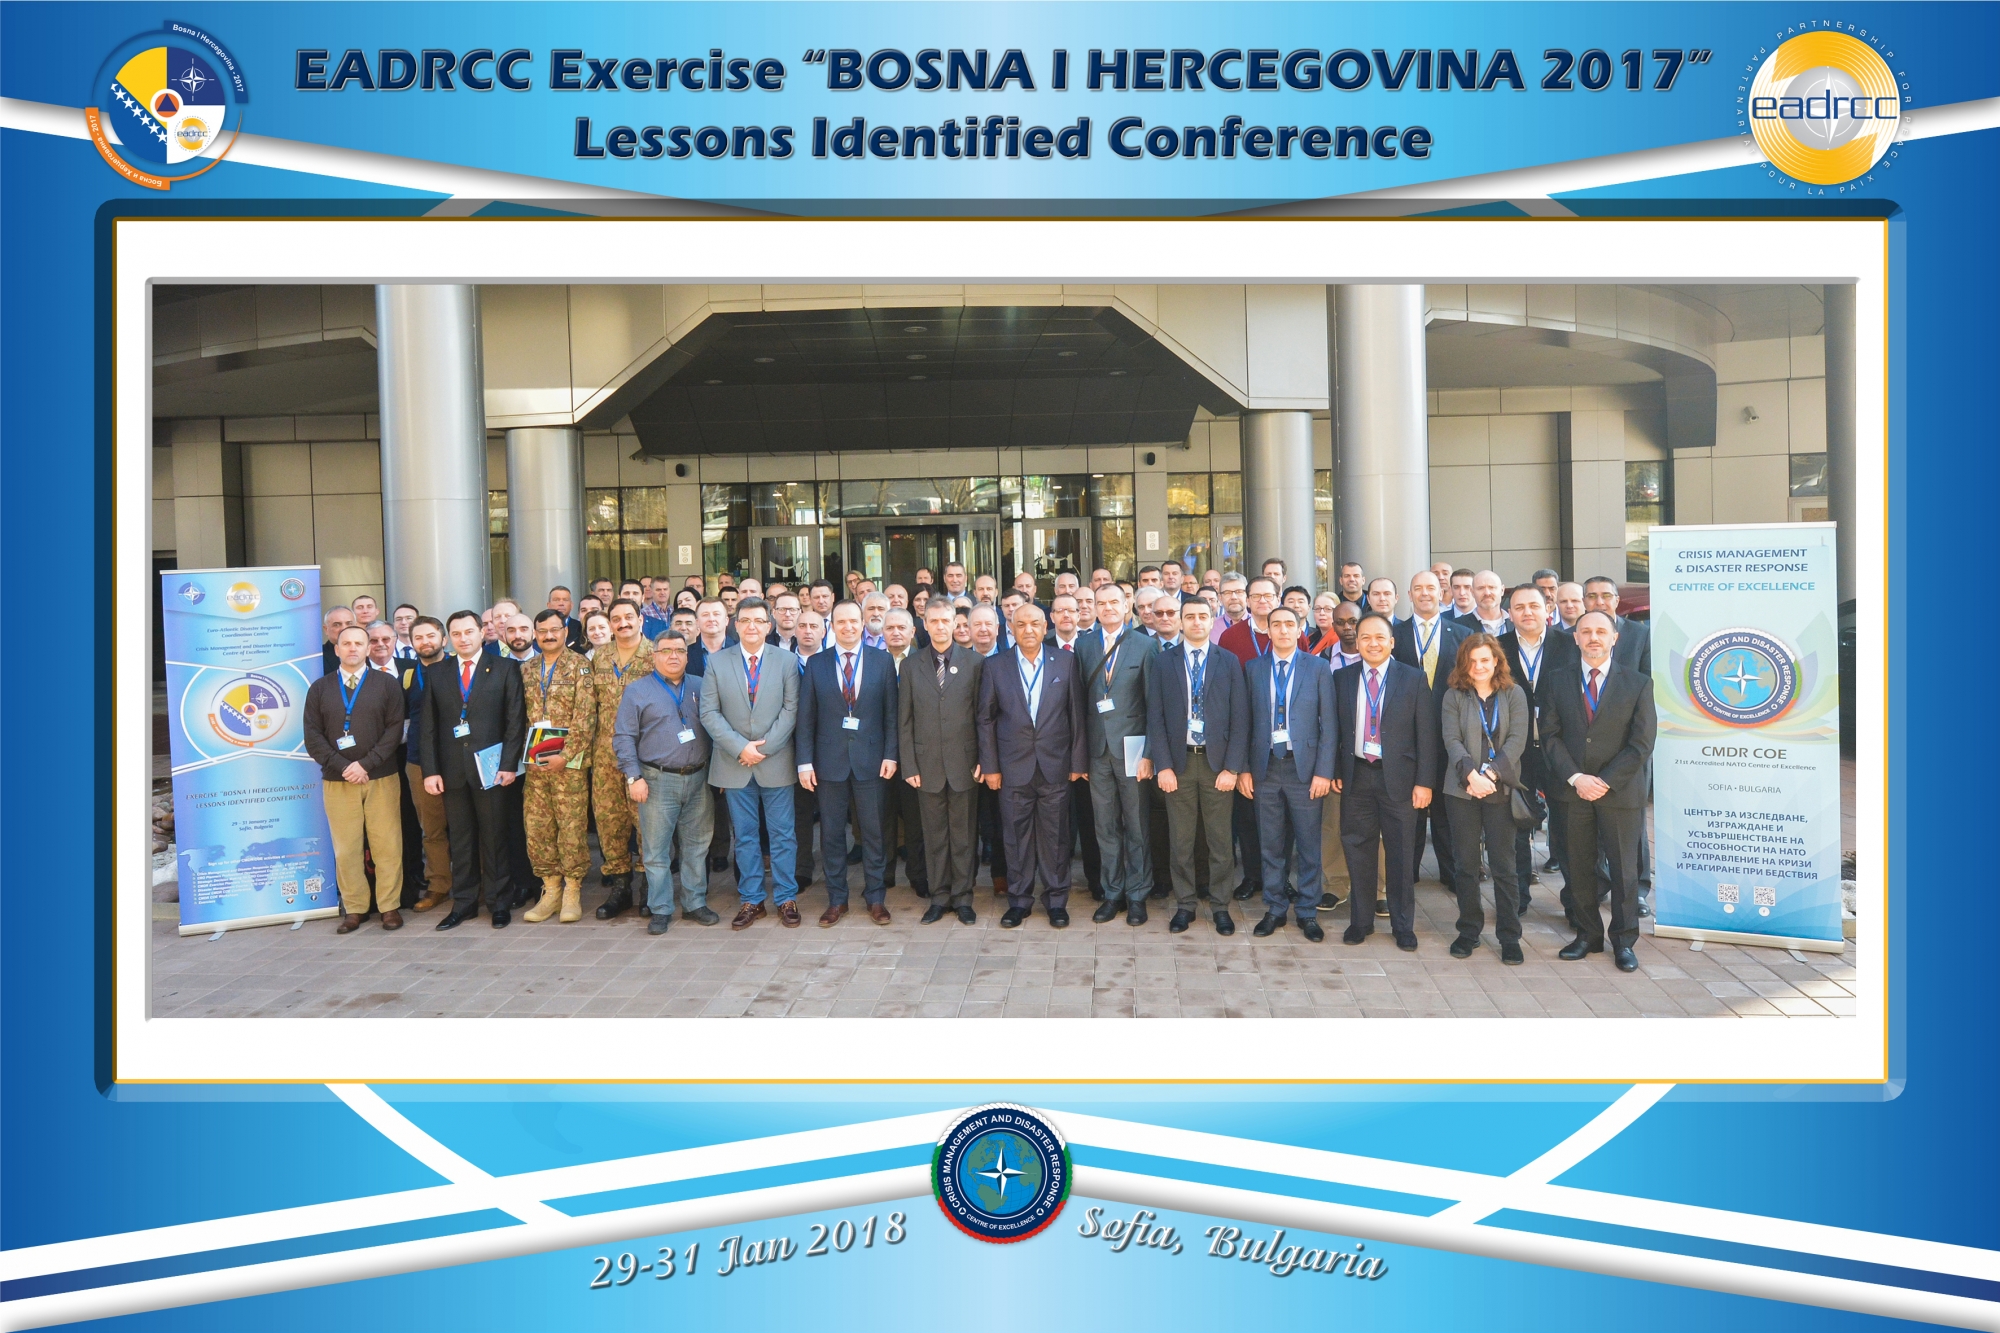 “BOSNA I HERCEGOVINA 2017” Lessons Identified Conference opens today